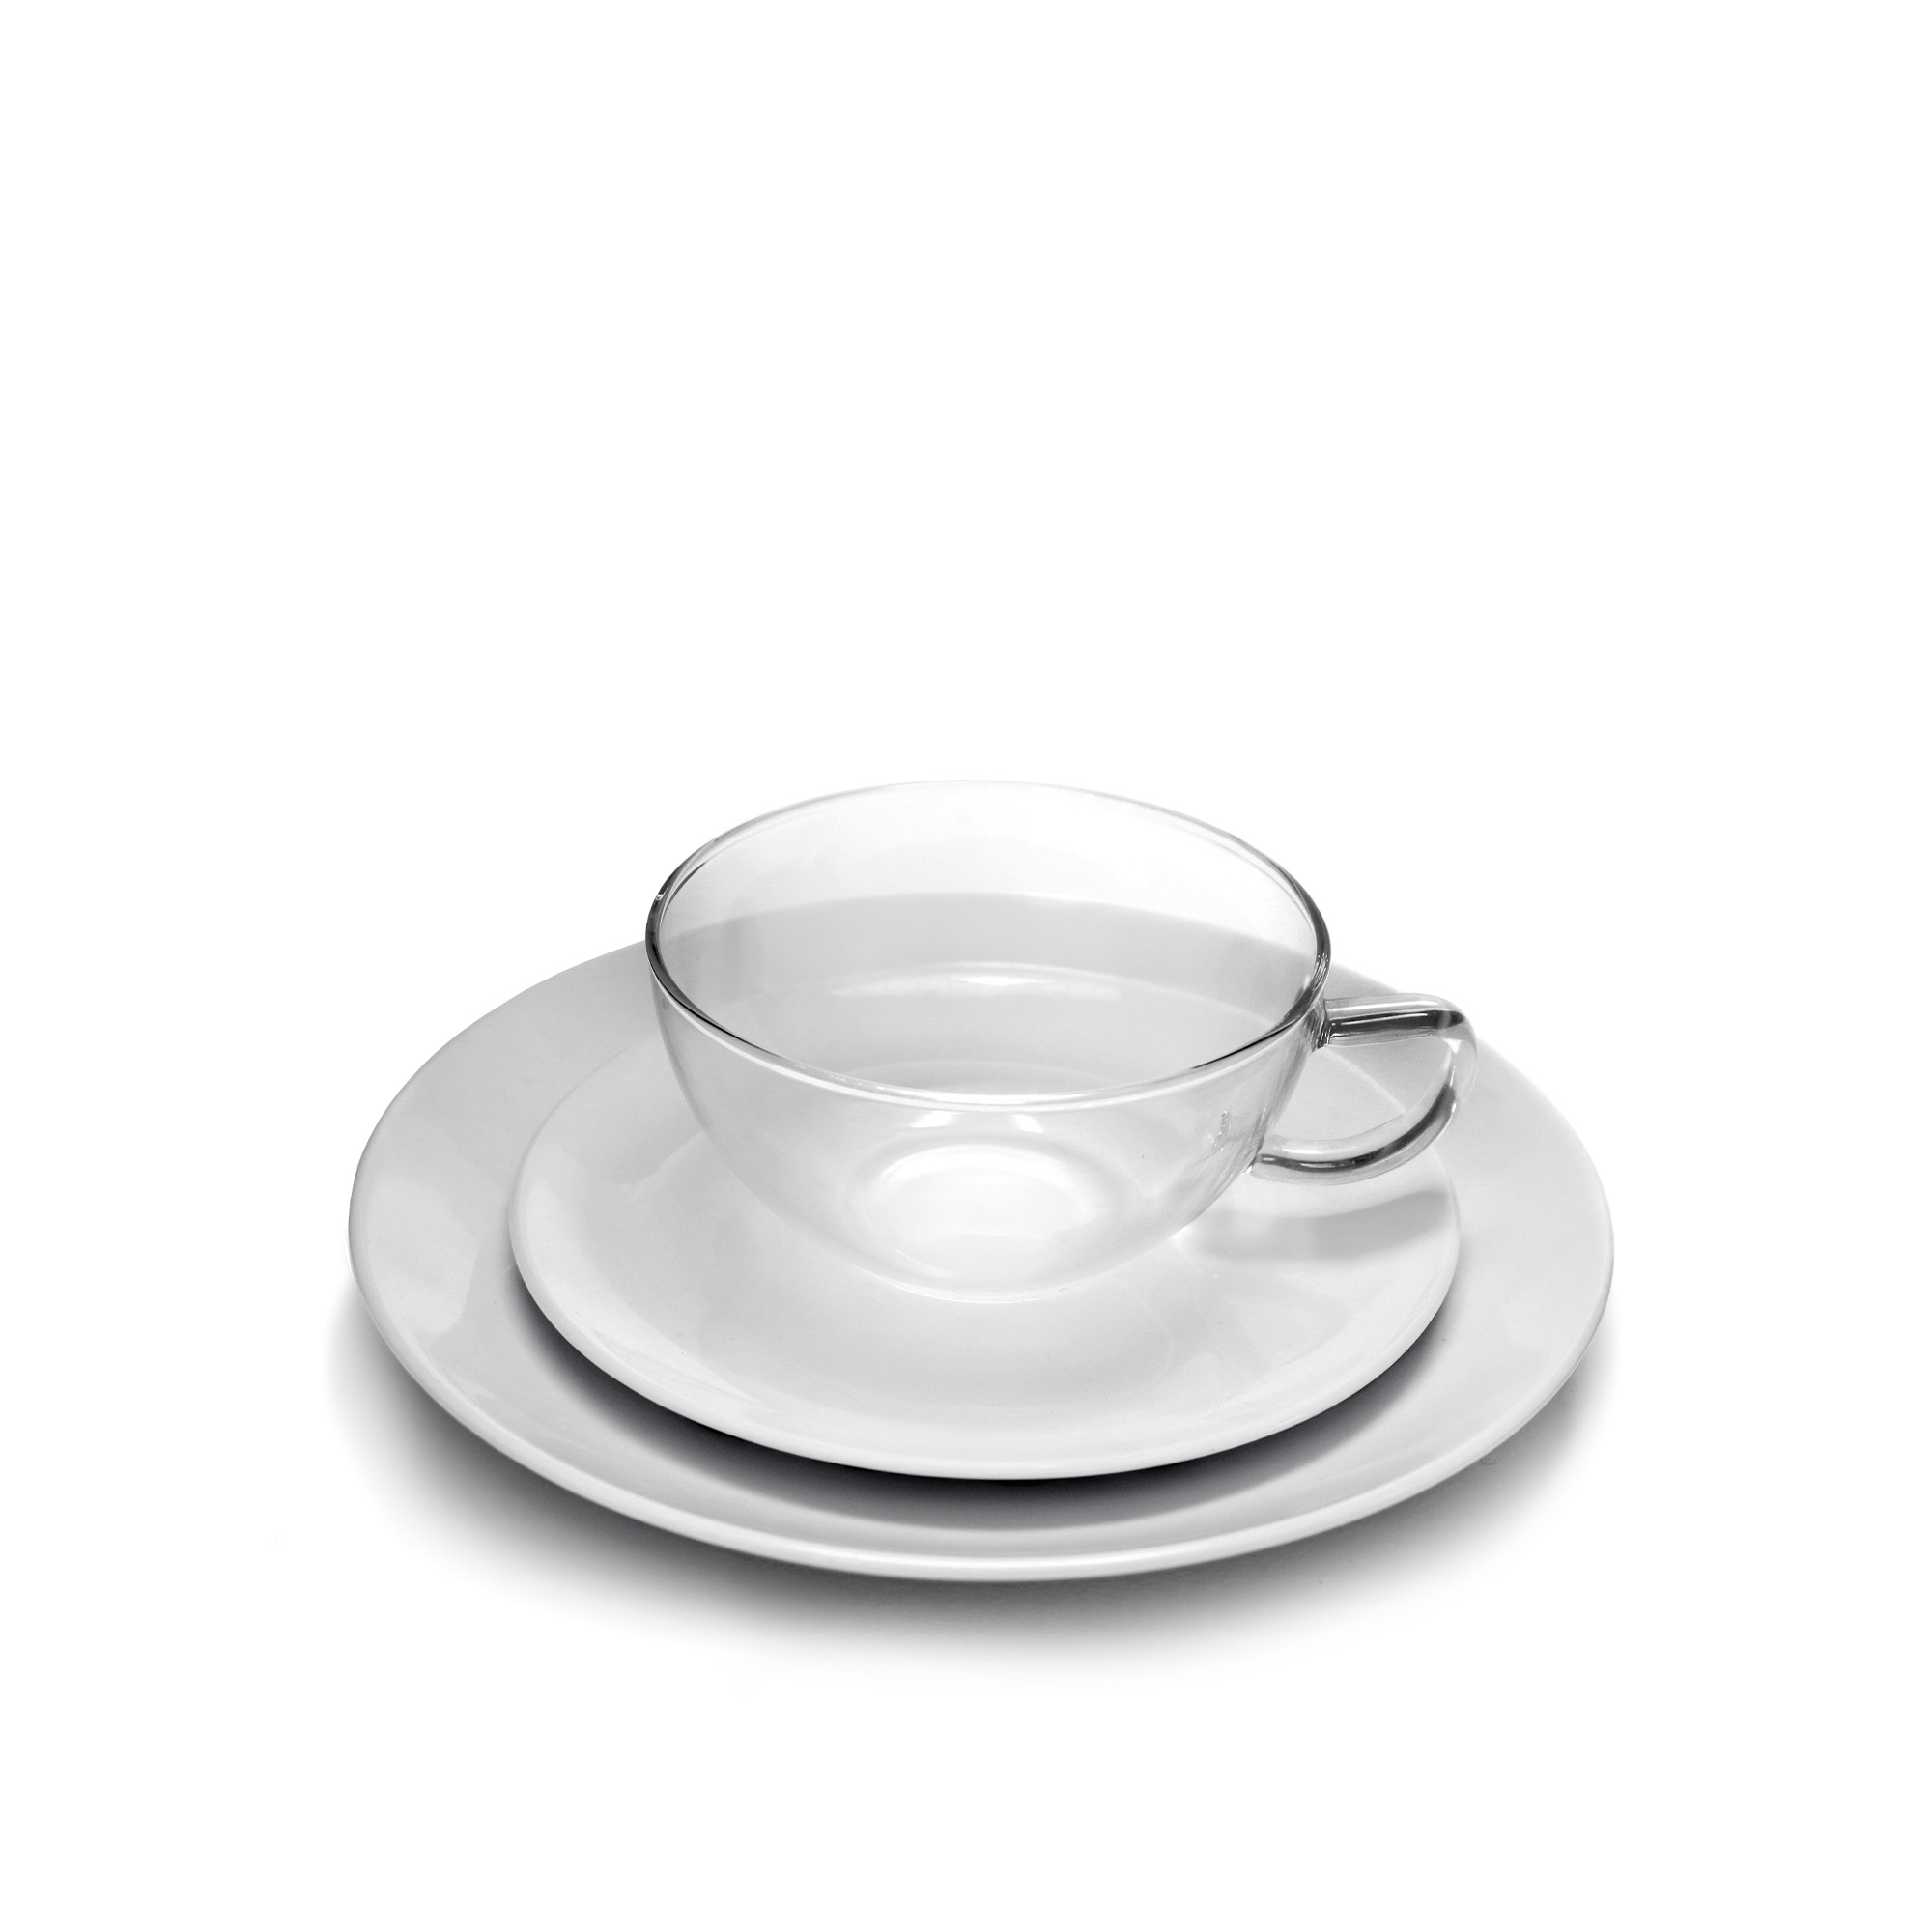 Jenaer Glas - Cup with saucer and plate Relations